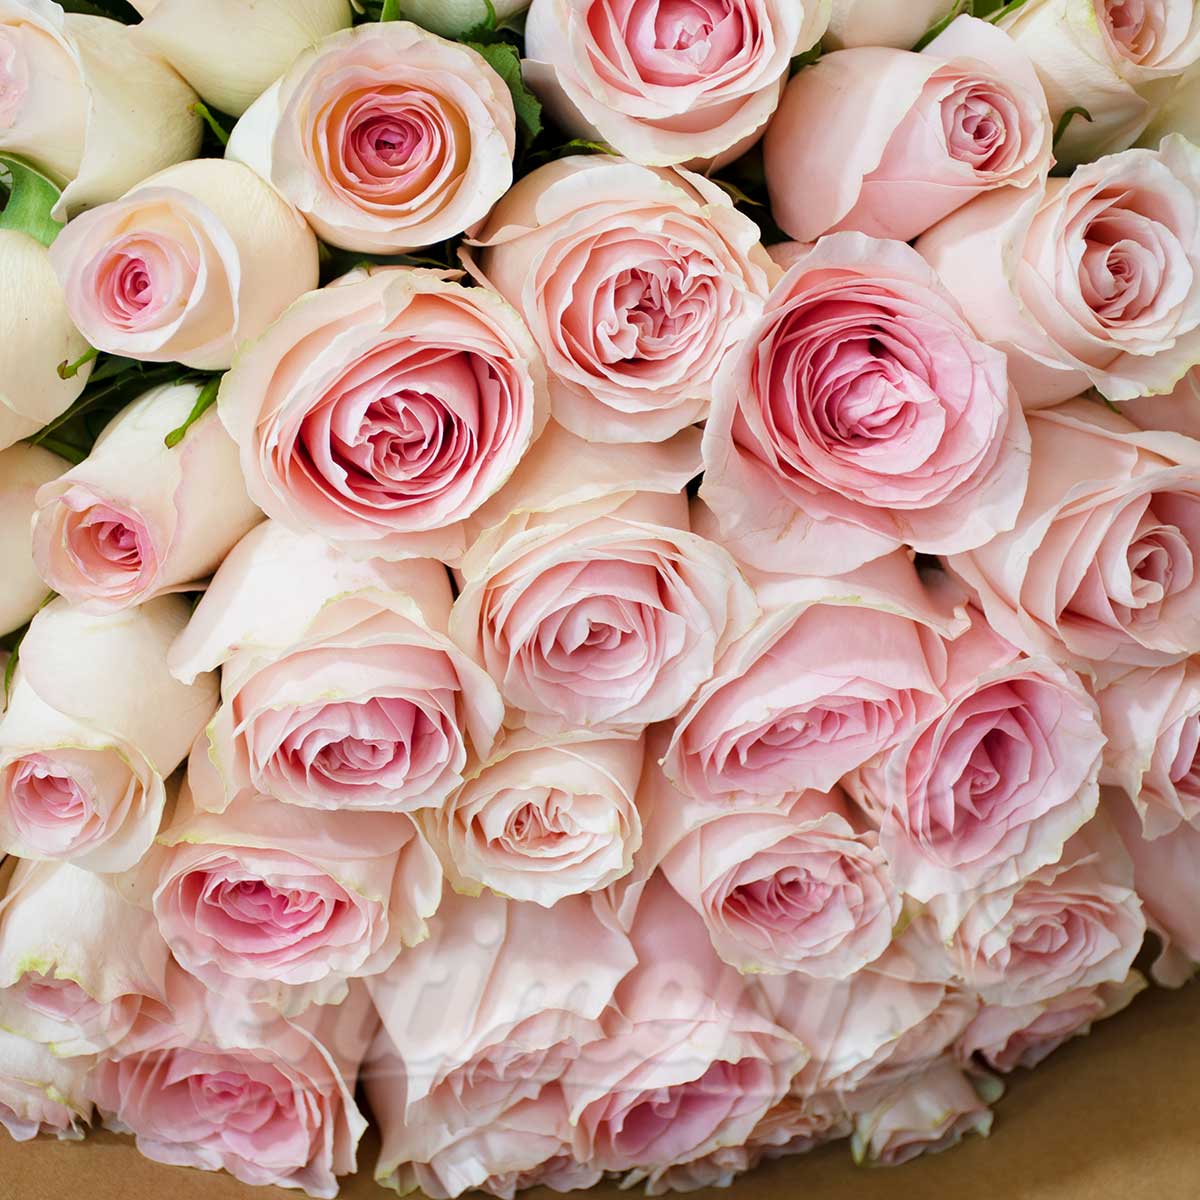 Pink Roses Flower Hand Bouquet